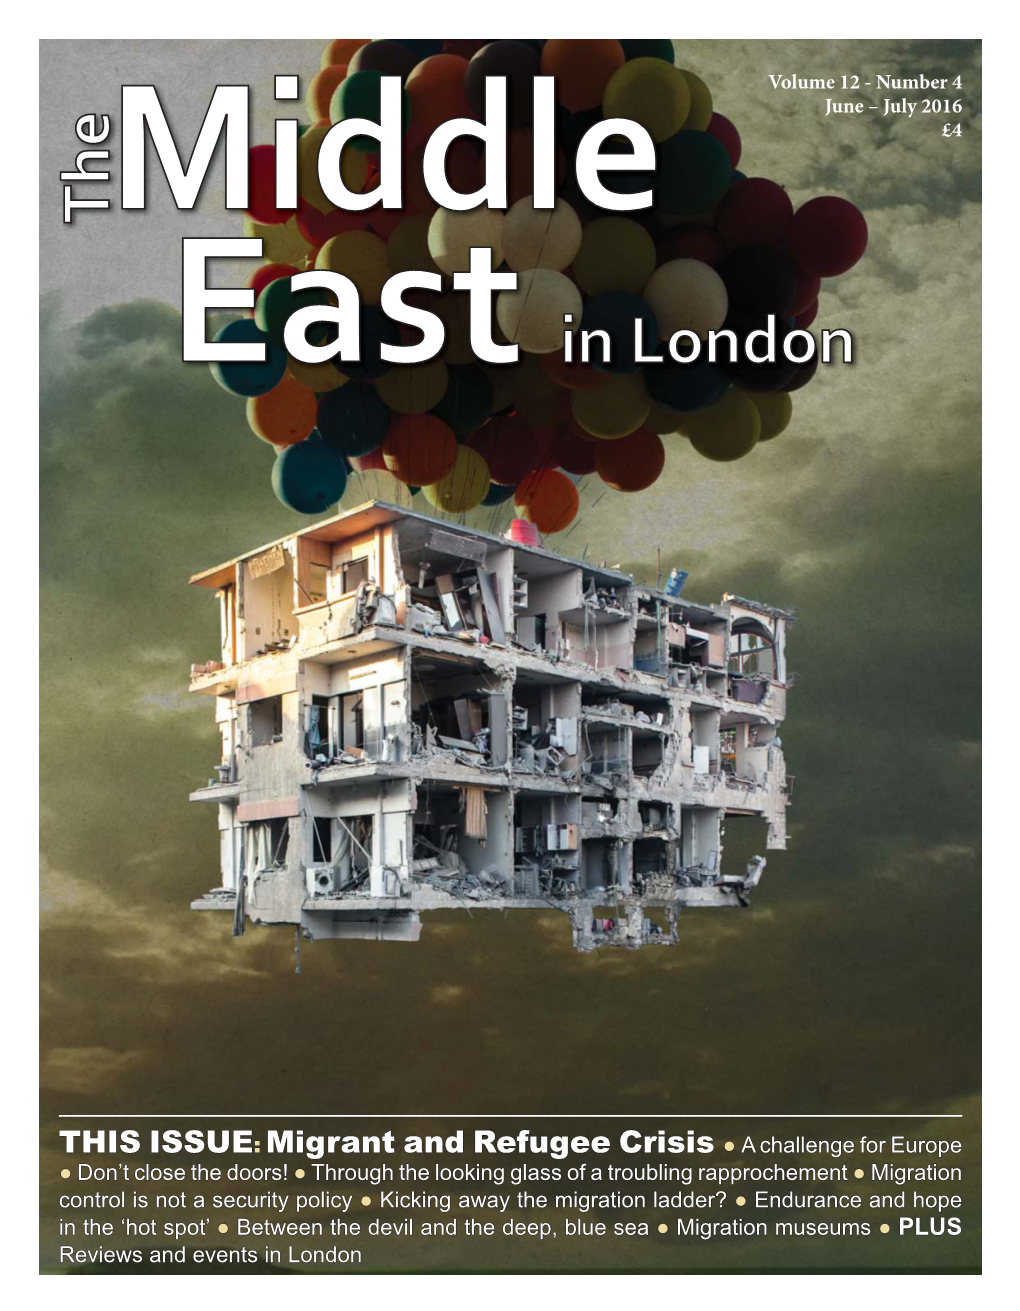 THIS ISSUE: Migrant and Refugee Crisis a Challenge for Europe